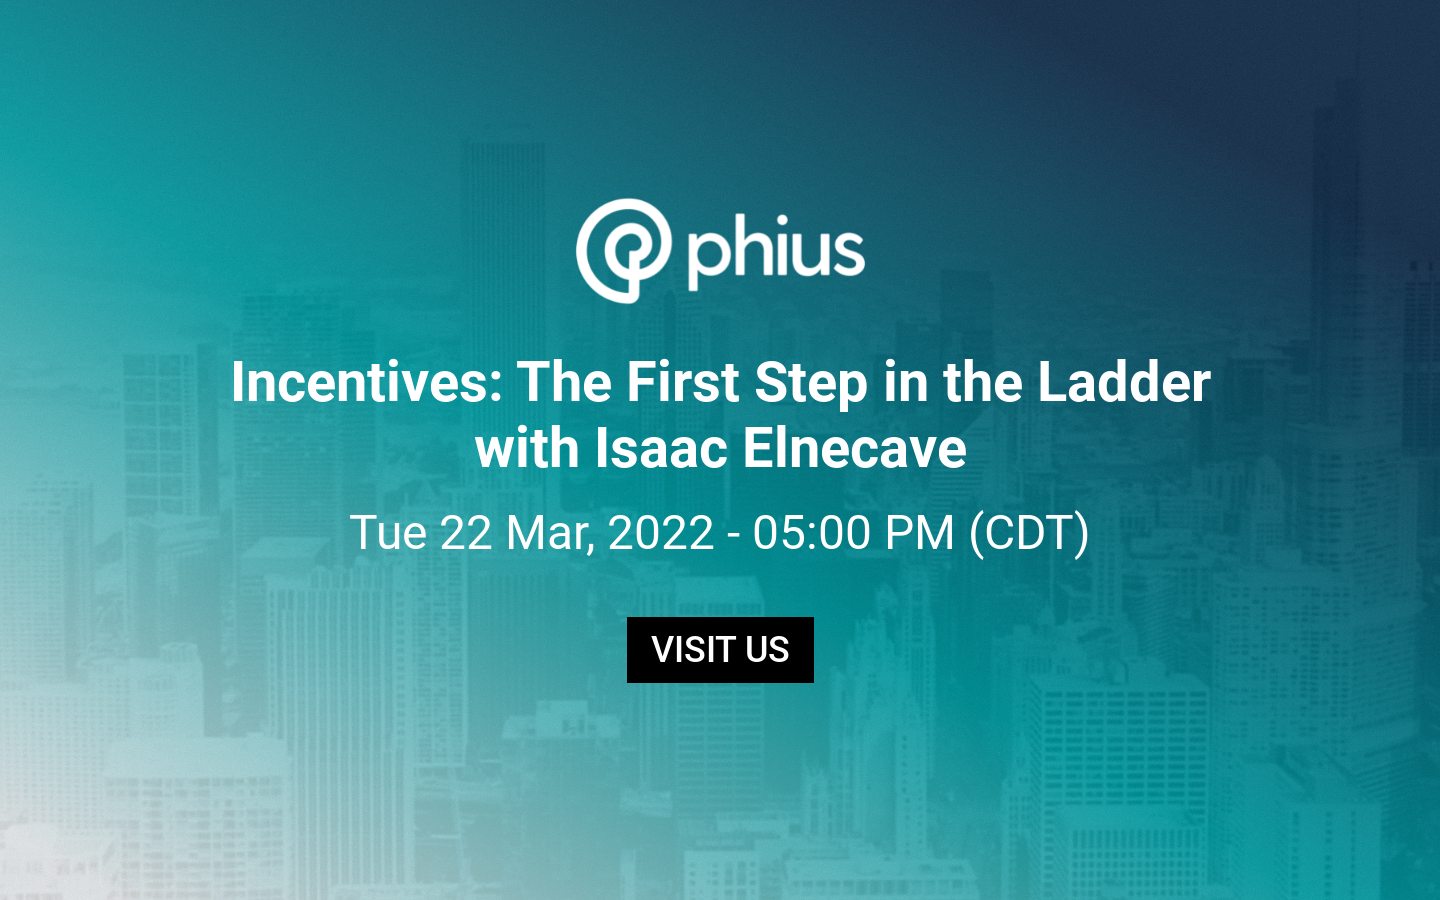 incentives-the-first-step-in-the-ladder-with-isaac-elnecave-mar-22